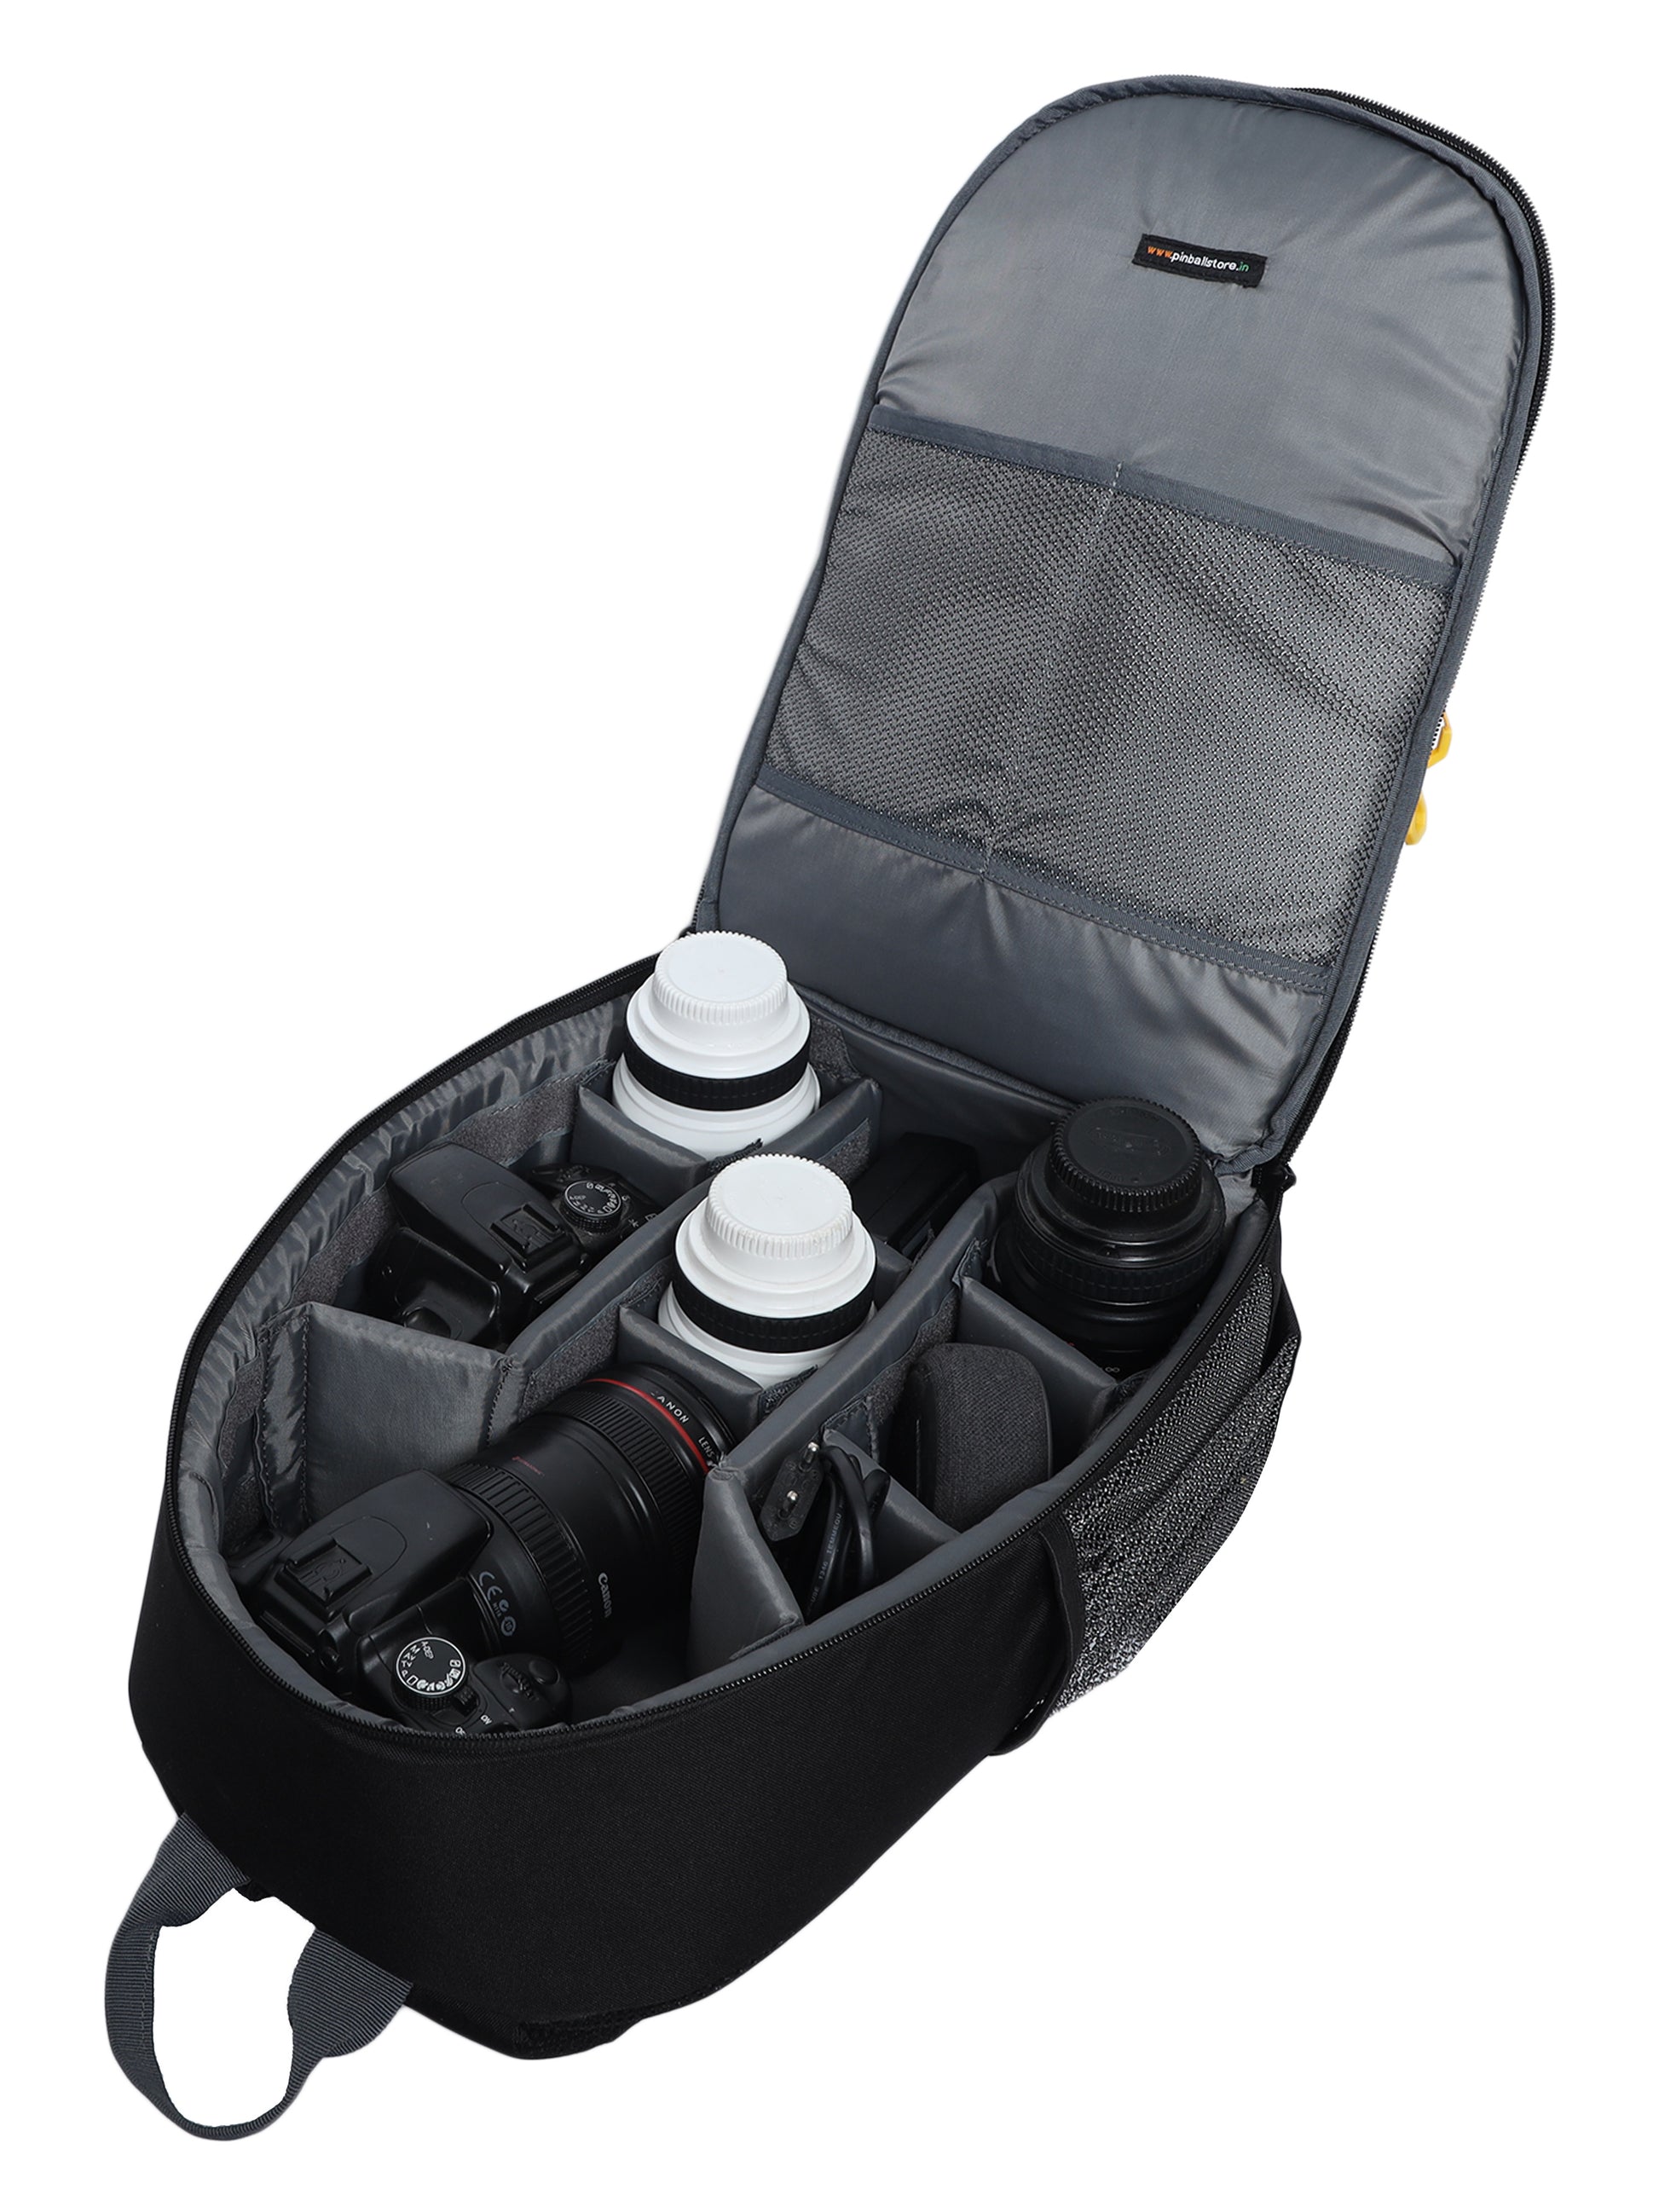 Open view of the 'Game On' camera bag from the Game series, showcasing its well-organized compartments filled with camera equipment and accessories. The bag provides secure storage for a camera body, lenses, memory cards, and other essential items. With its spacious interior and smart organization, the 'Game On' camera bag ensures easy access and protection for your photography gear while on the go